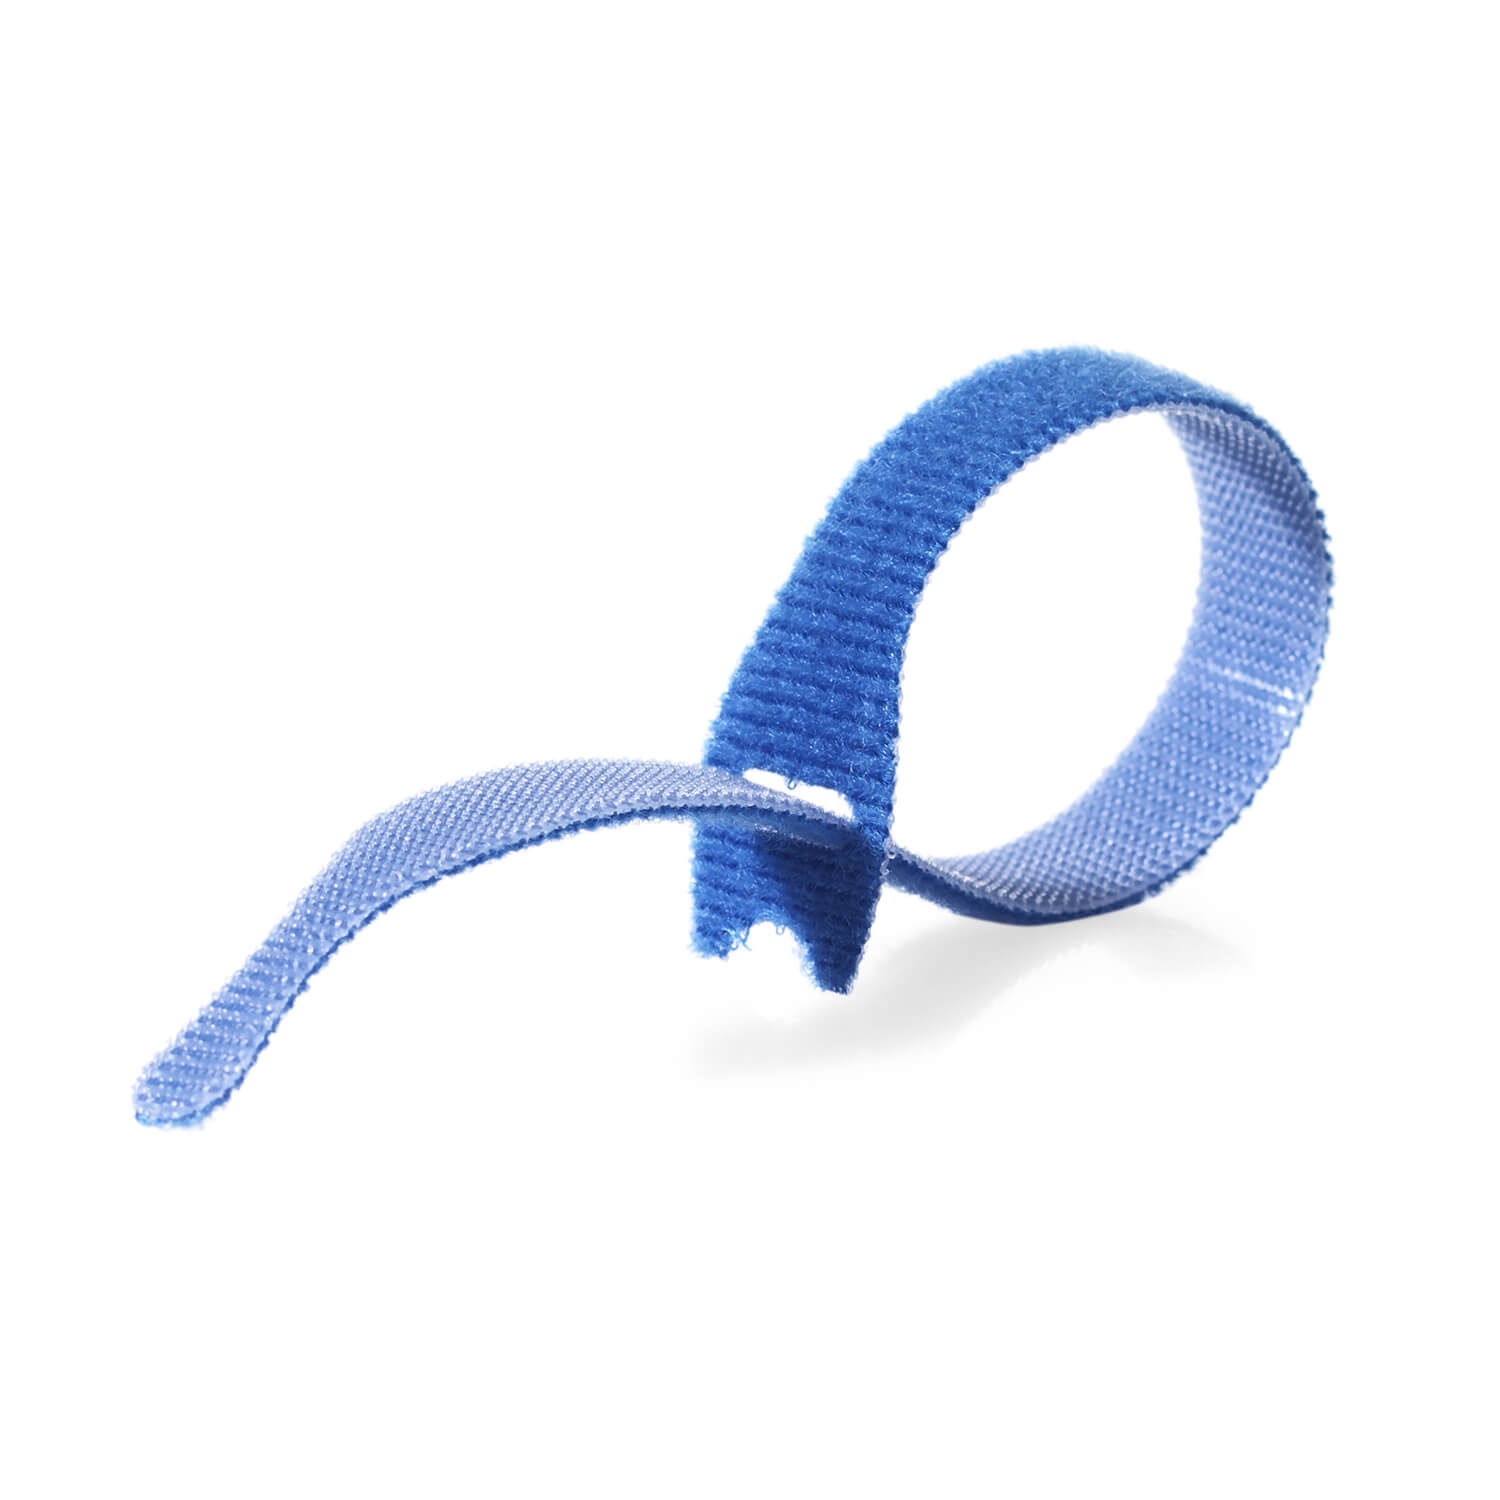 VELCRO ONE-WRAP RE-USABLE HOOK /& LOOP STRAPPING CABLE TIES 20mm x 200mm BLUE